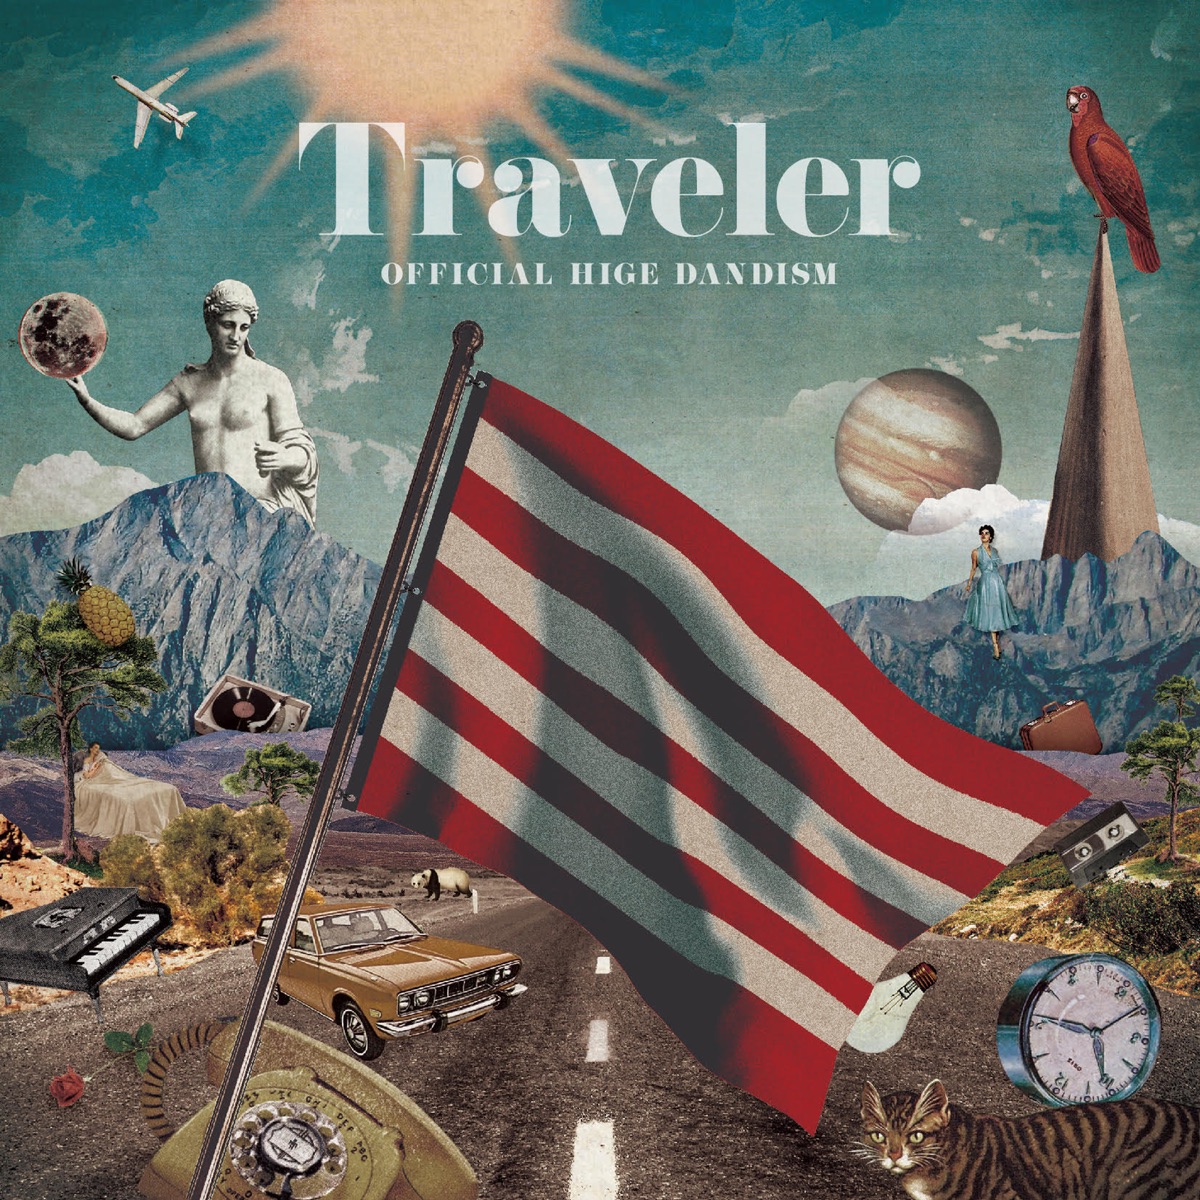 Cover art for『Official HIGE DANdism - Vintage』from the release『Traveler』